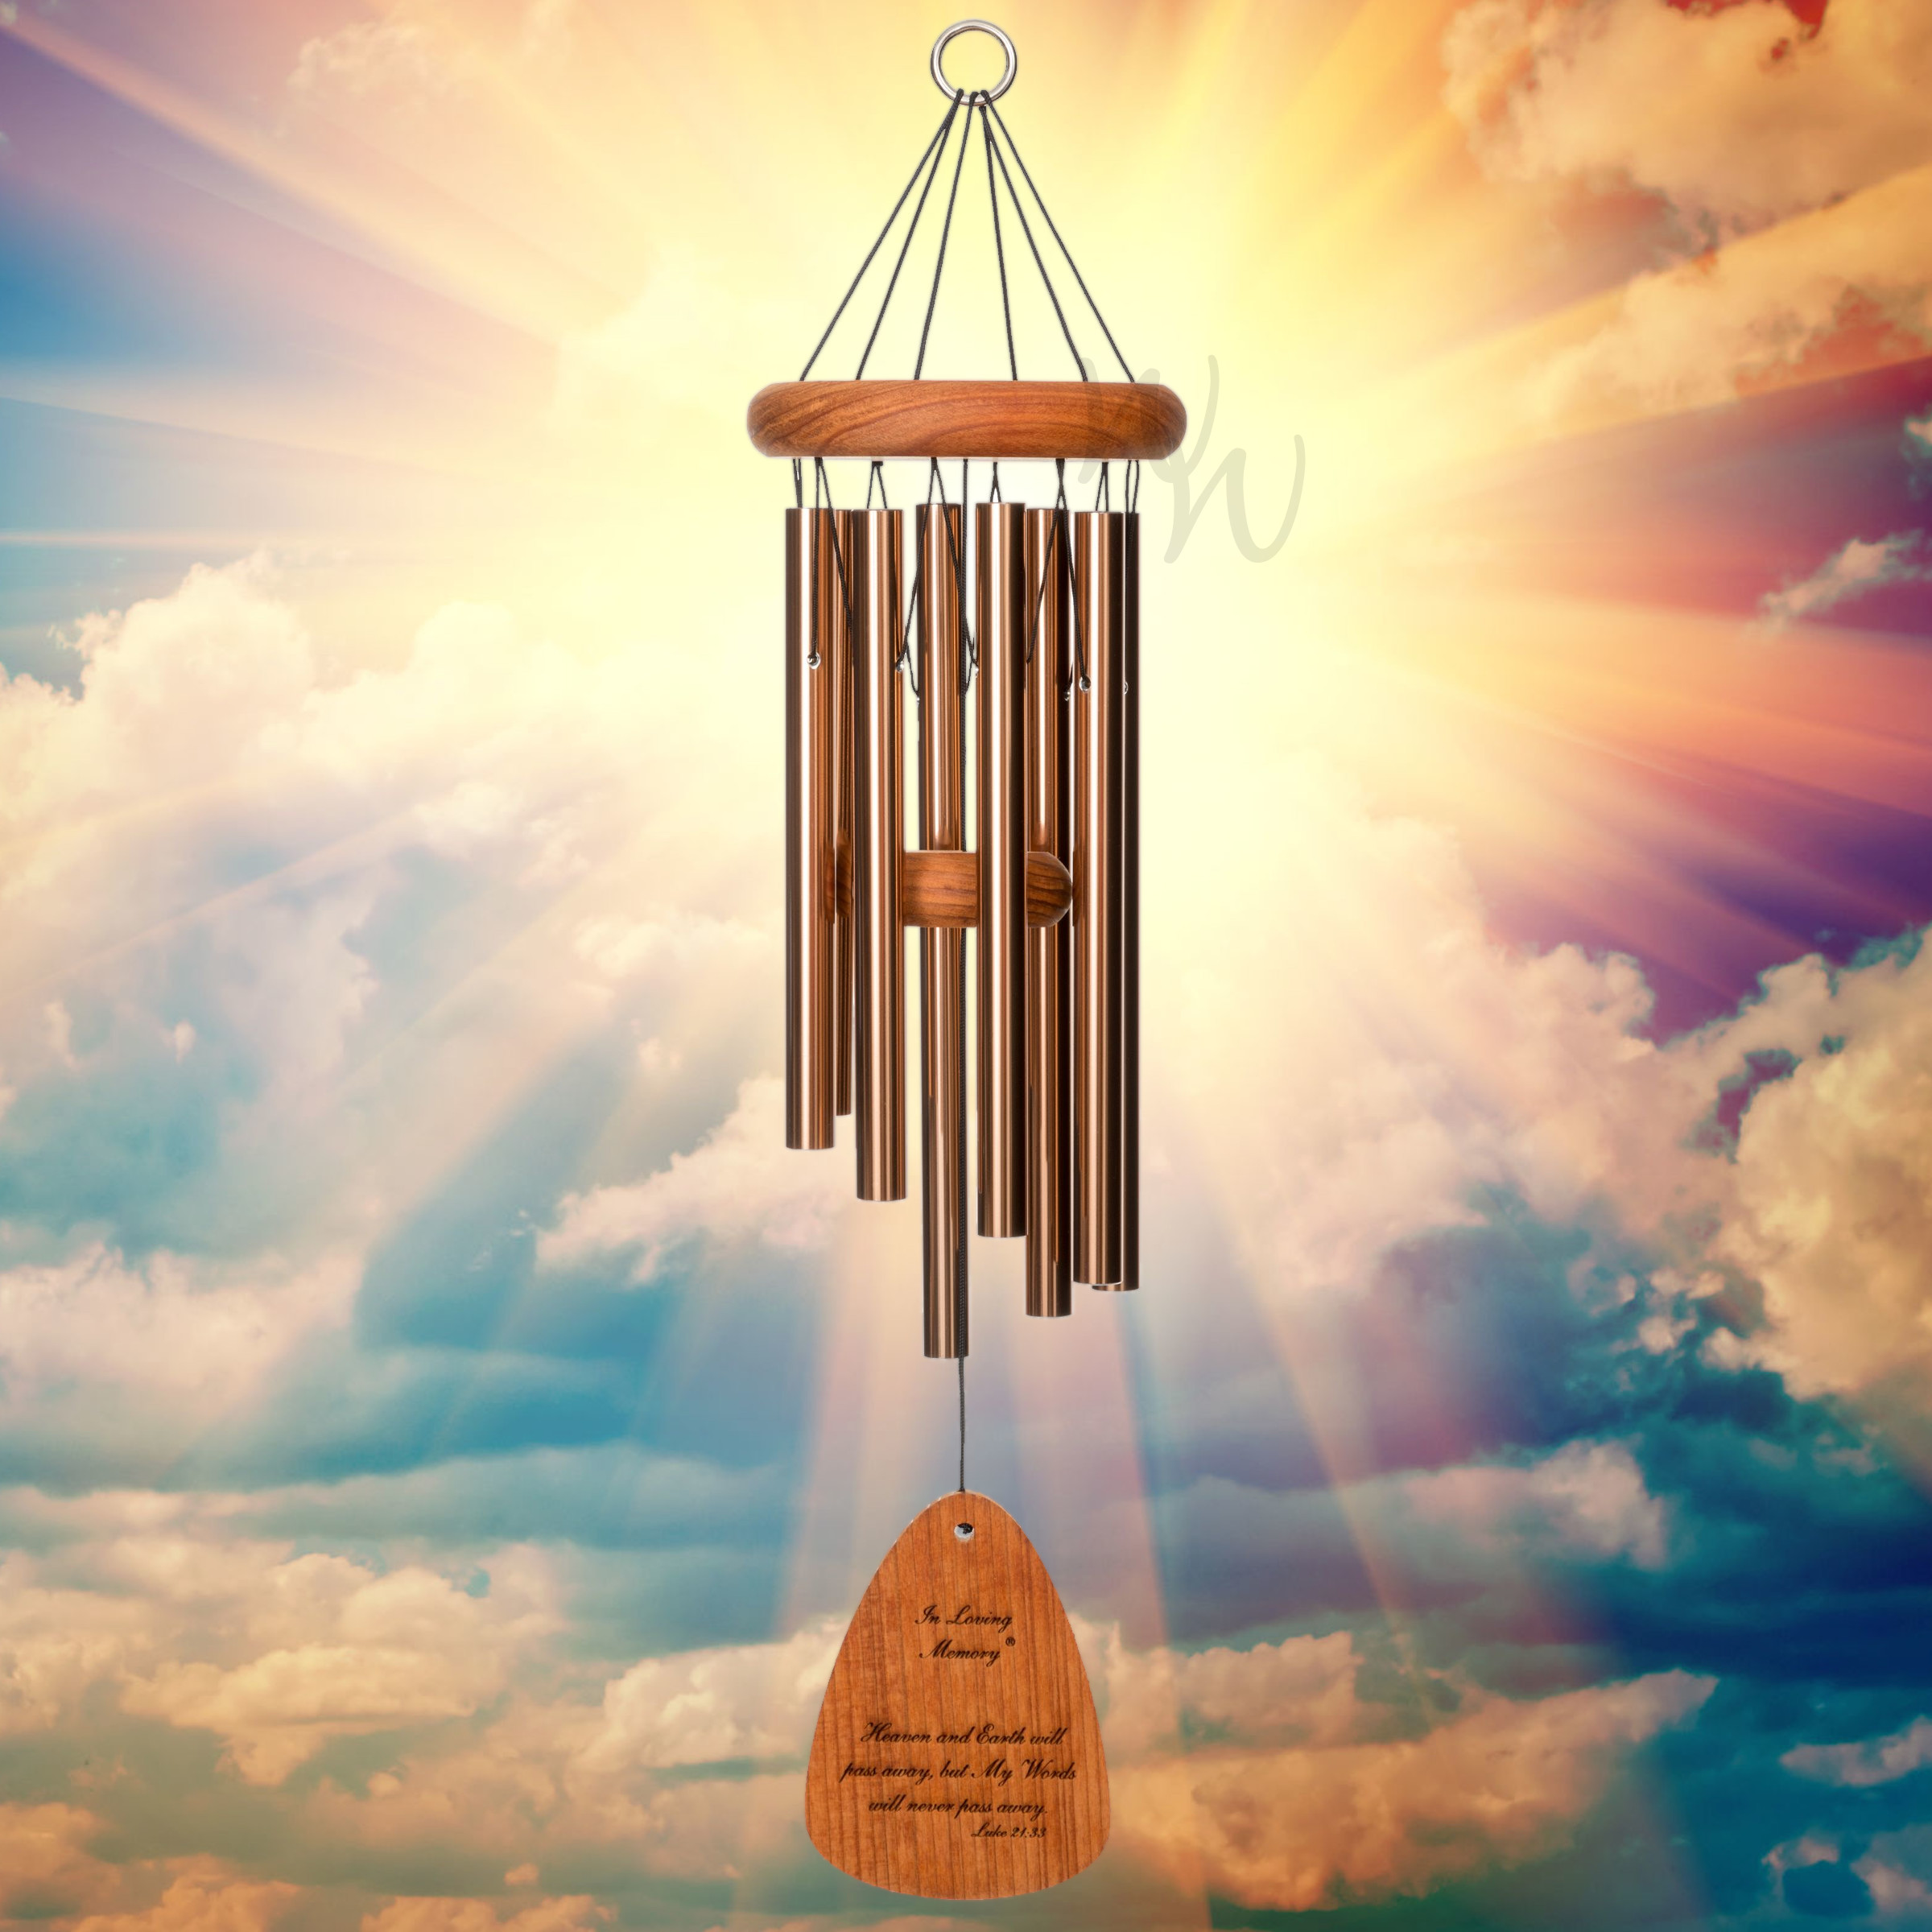 In Loving Memory 24 Inch Windchime - My Words will never pass away... in Bronze